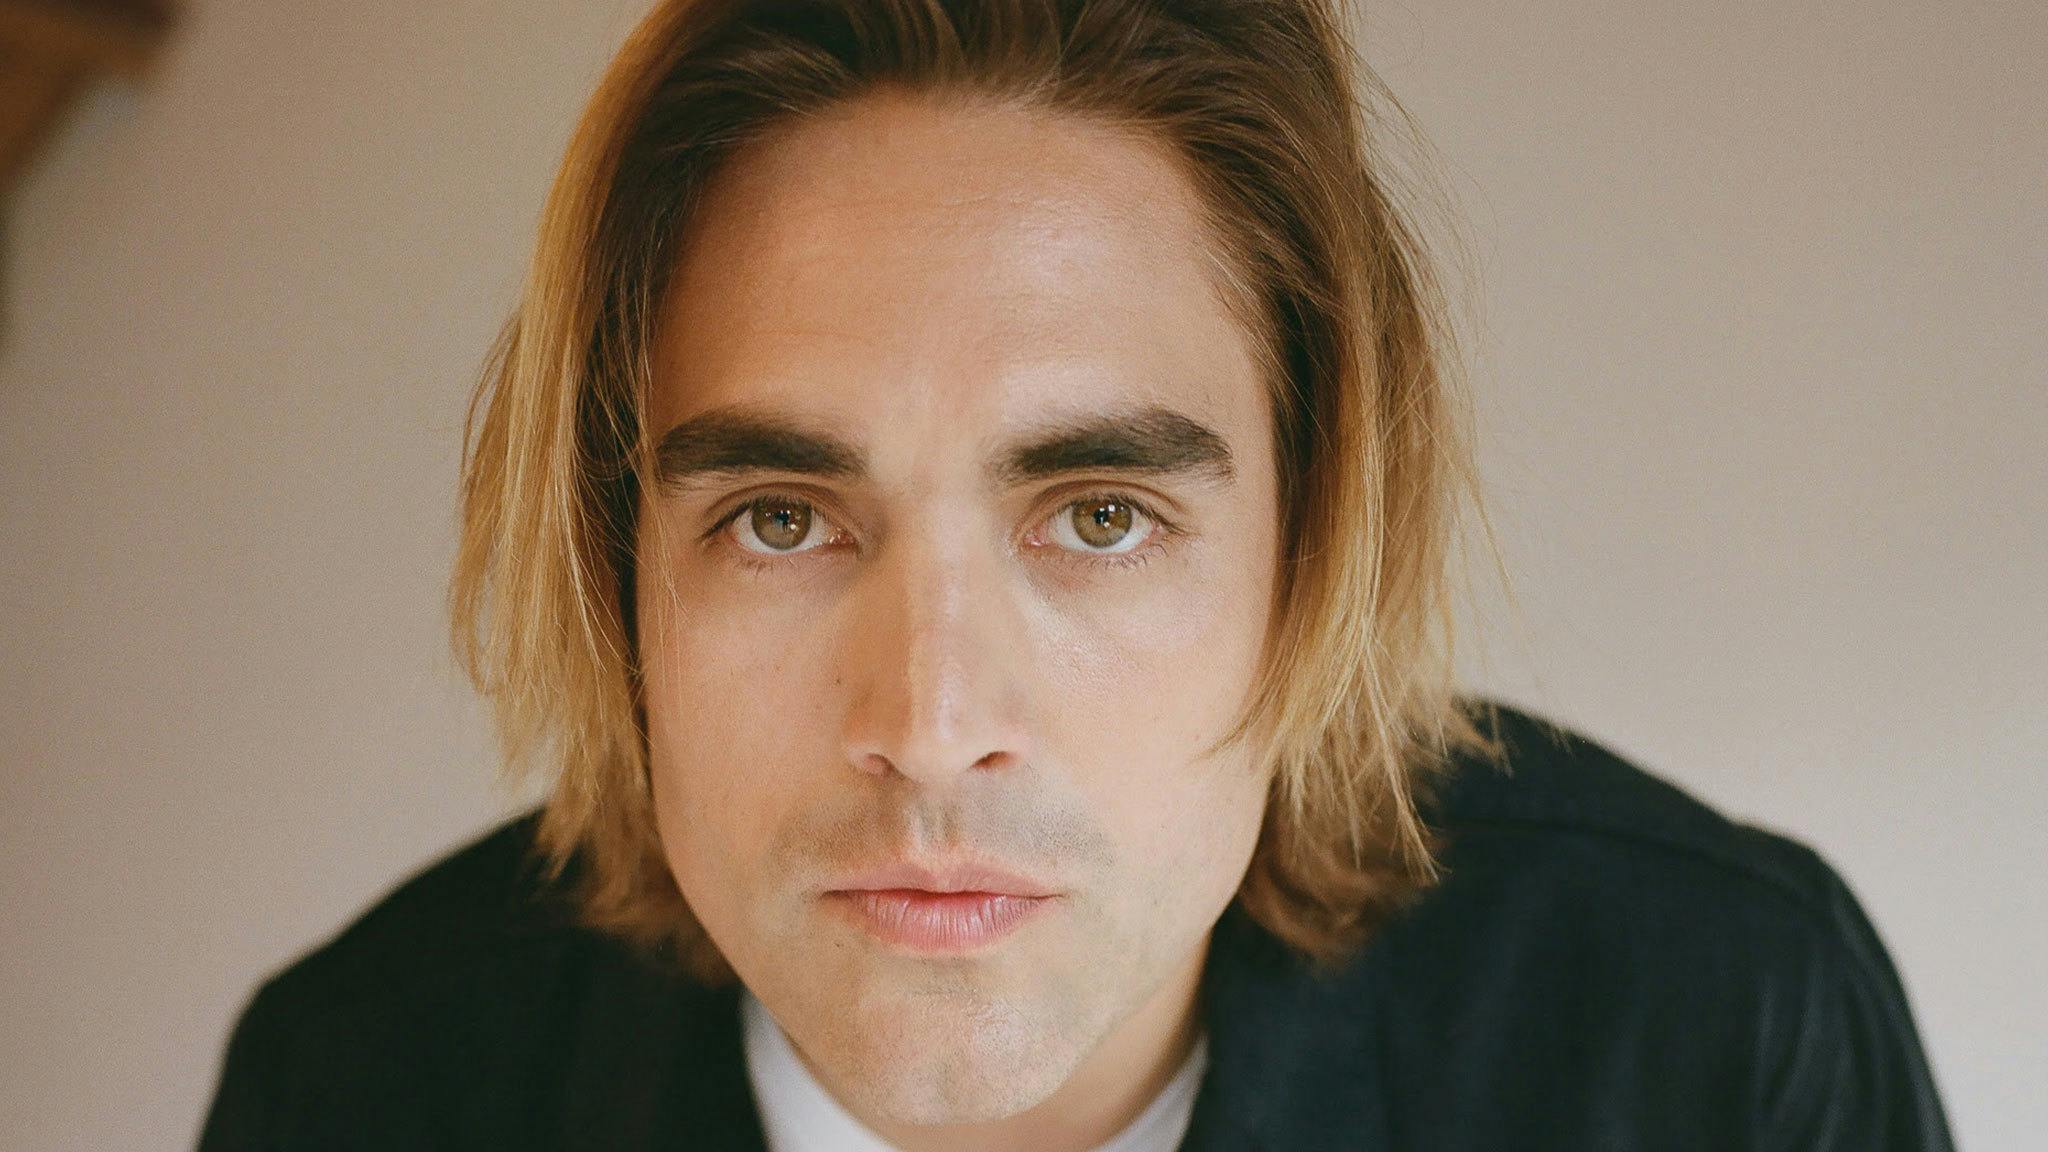 Charlie Simpson releases new EP after winning The Masked Singer